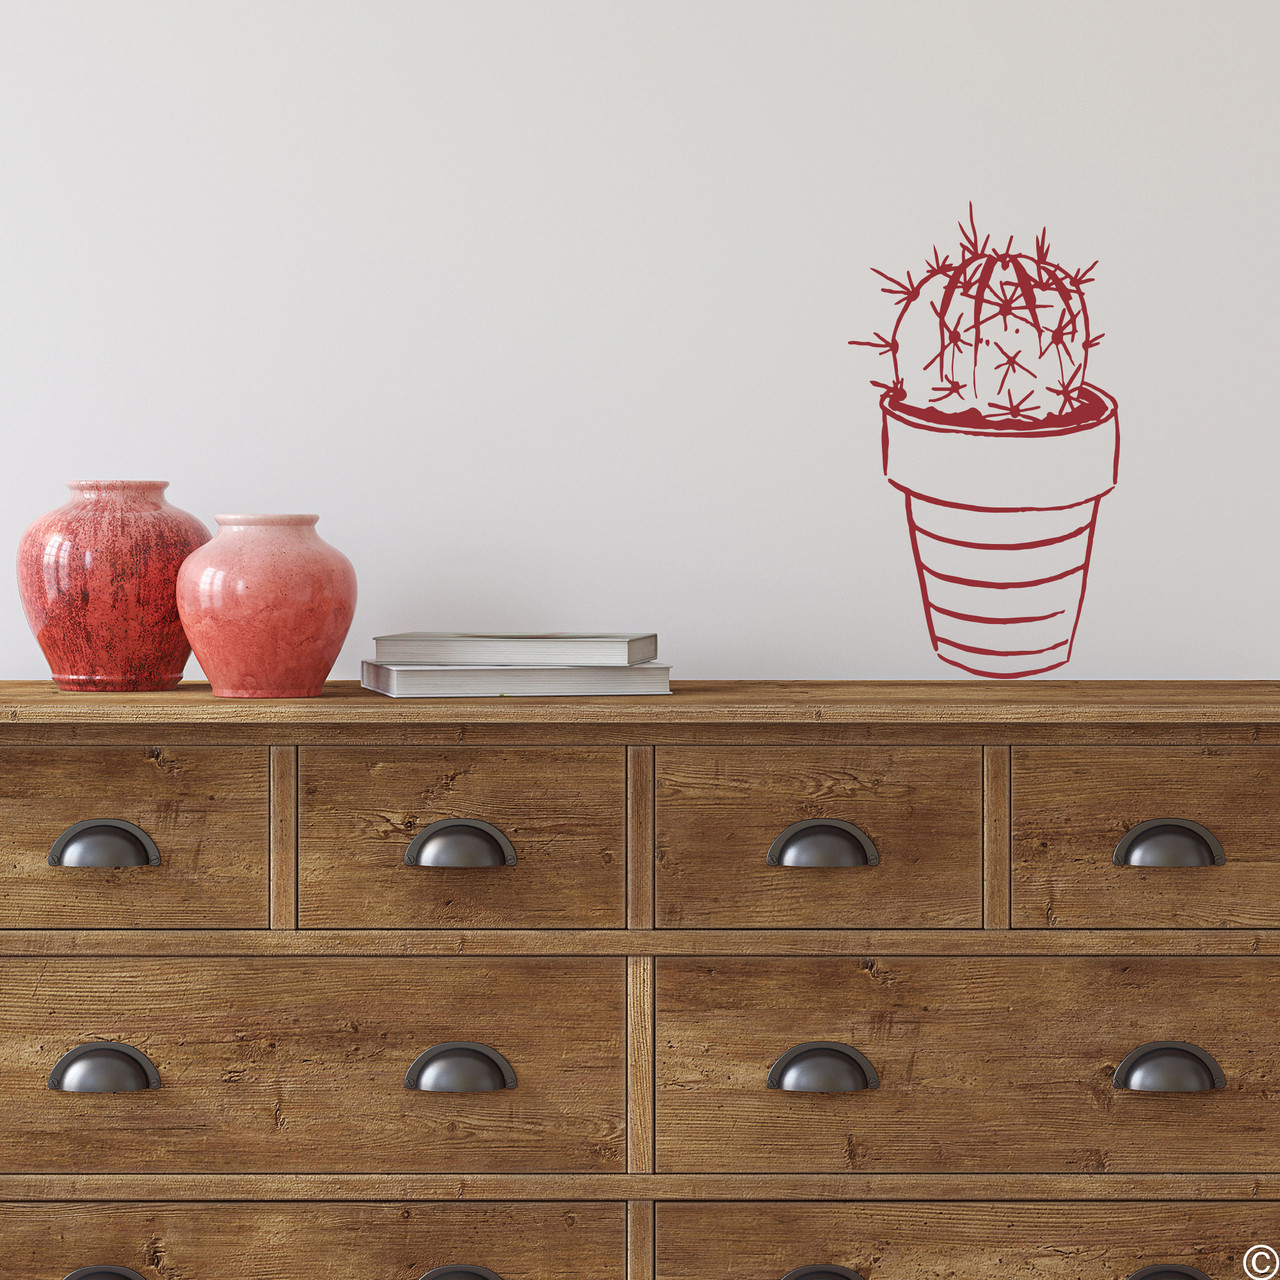 The hand drawn potted cactus wall decal in dark red vinyl color.